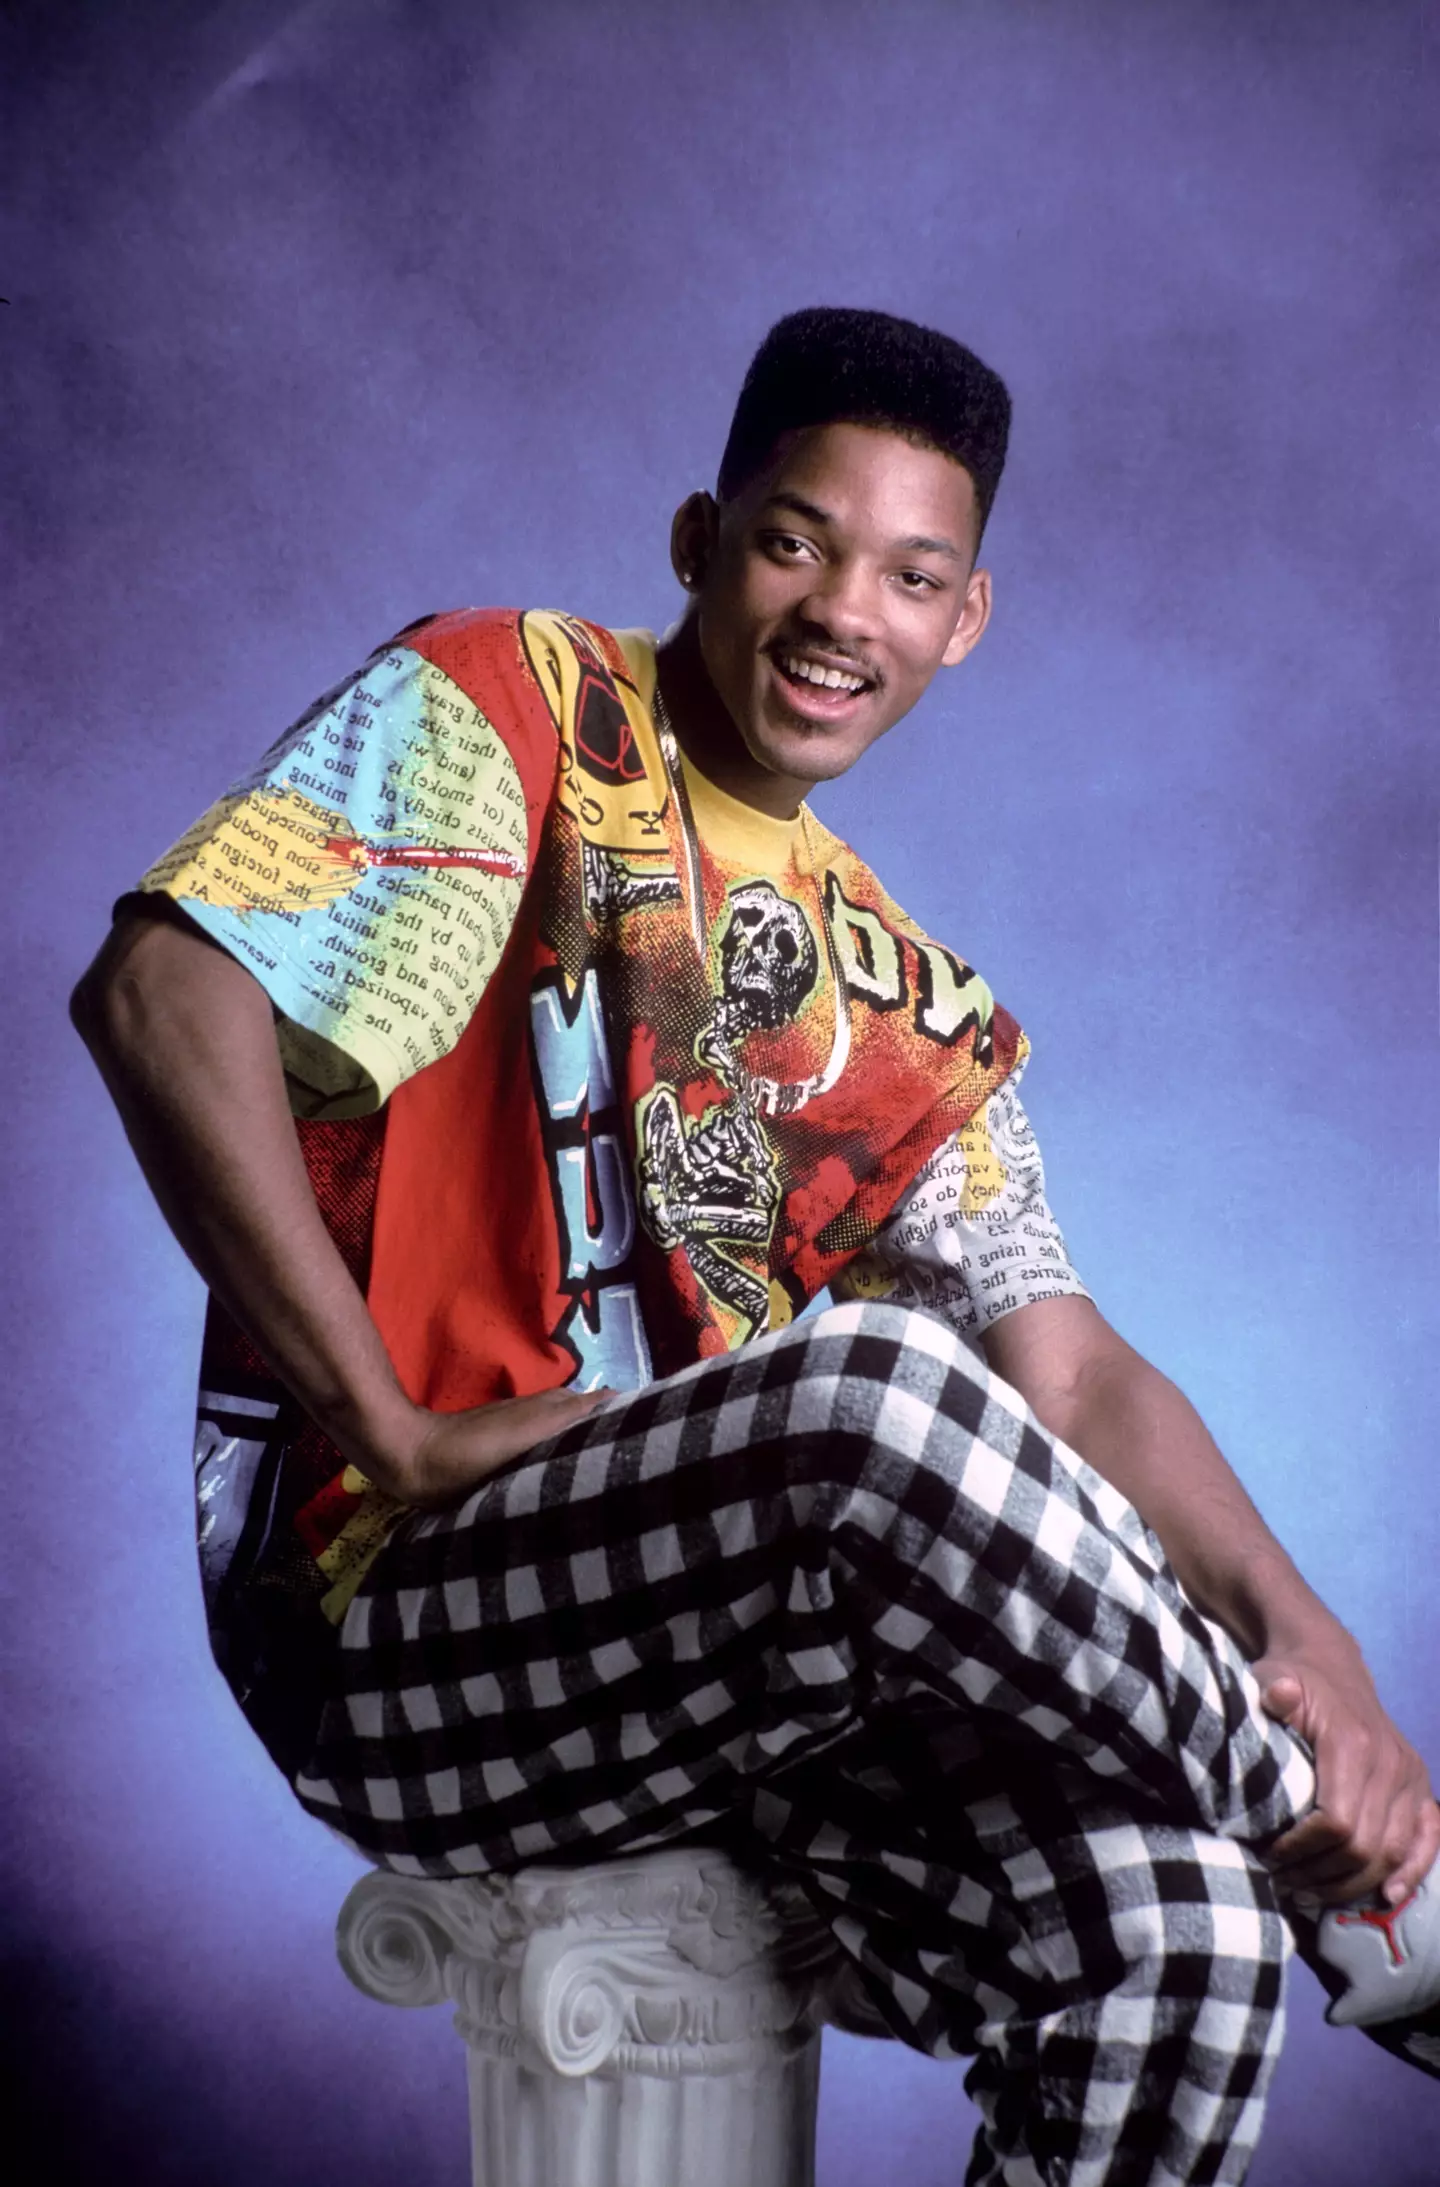 People have been quoting The Fresh Prince of Bel Air (